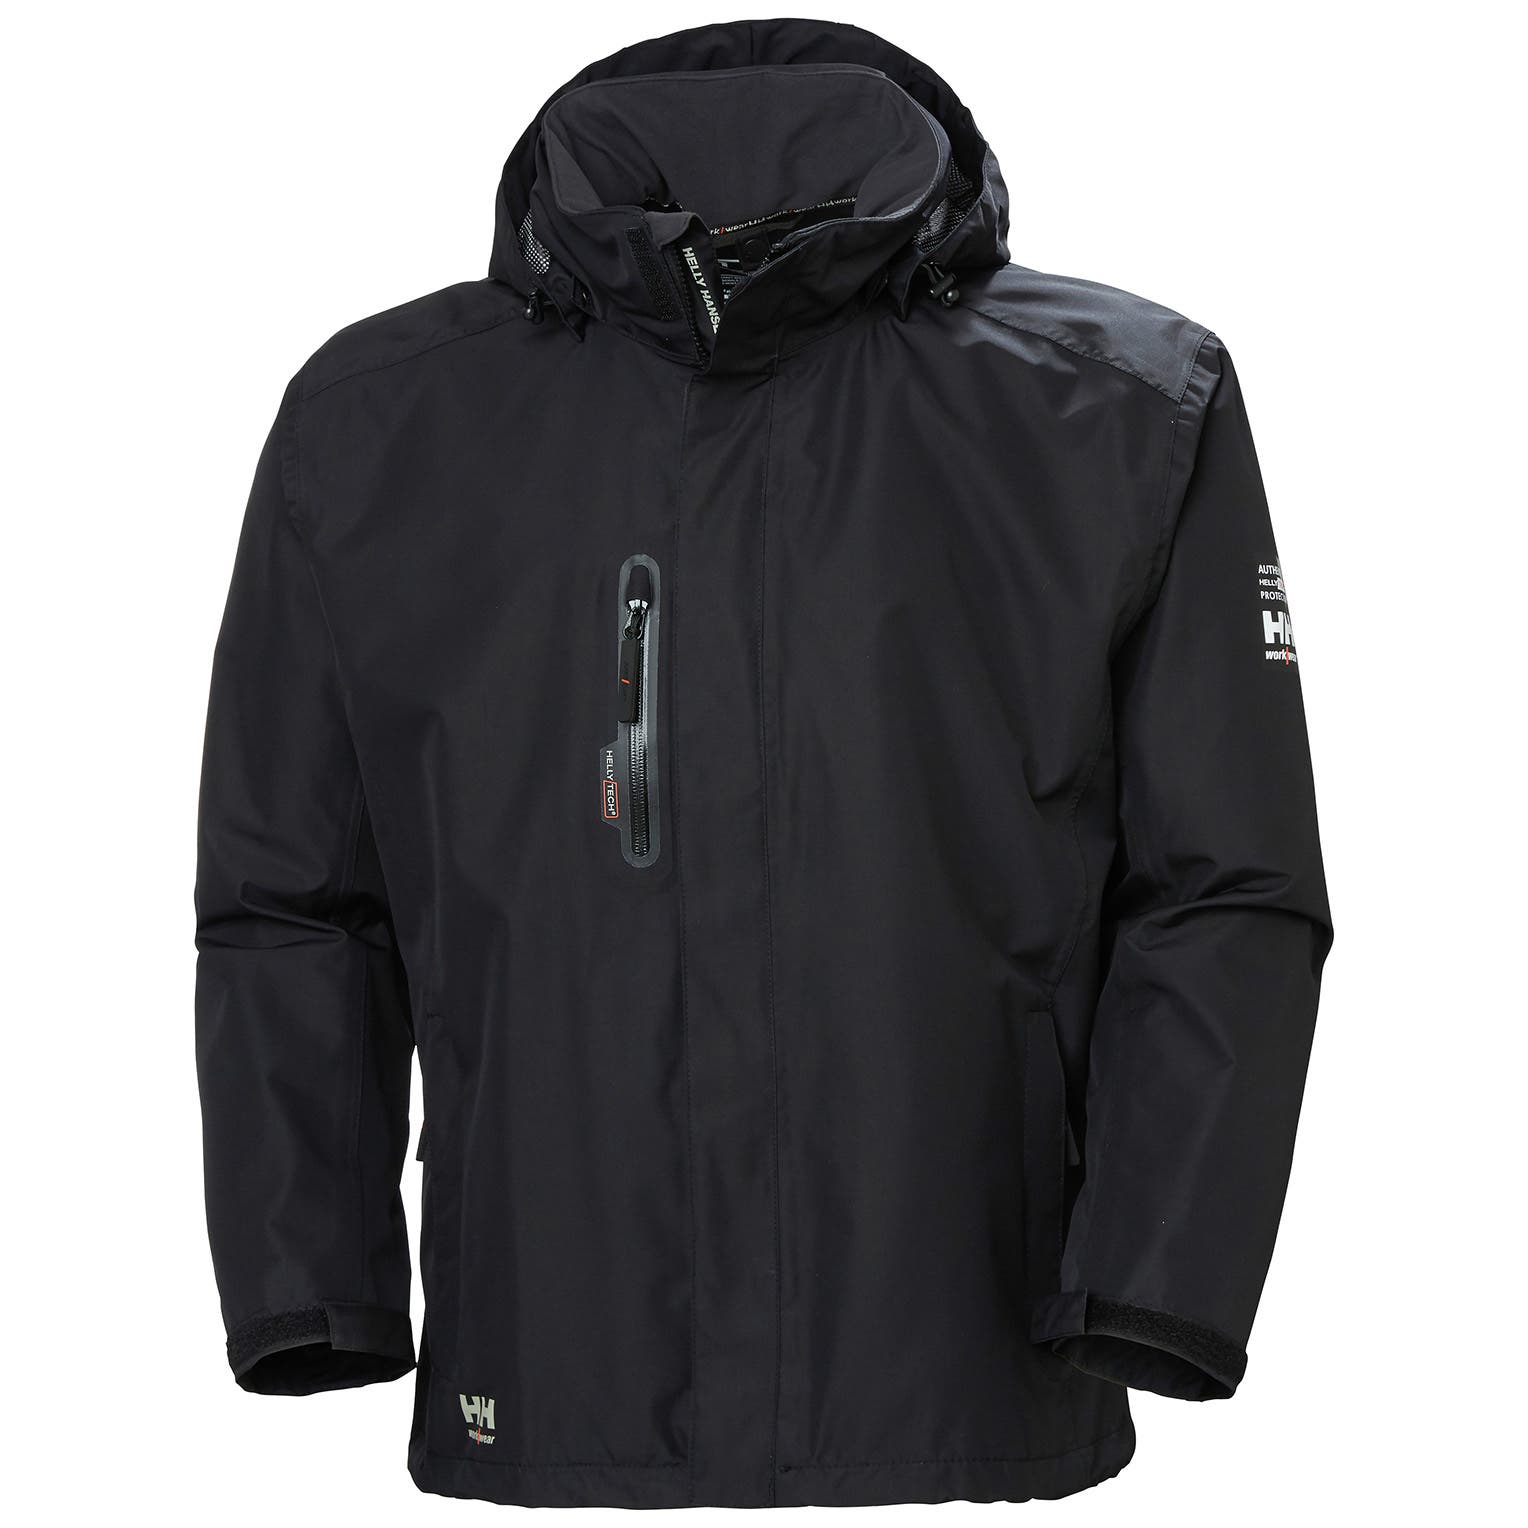 Helly Hansen Men's Manchester Haag Shell Jacket in Black from the front